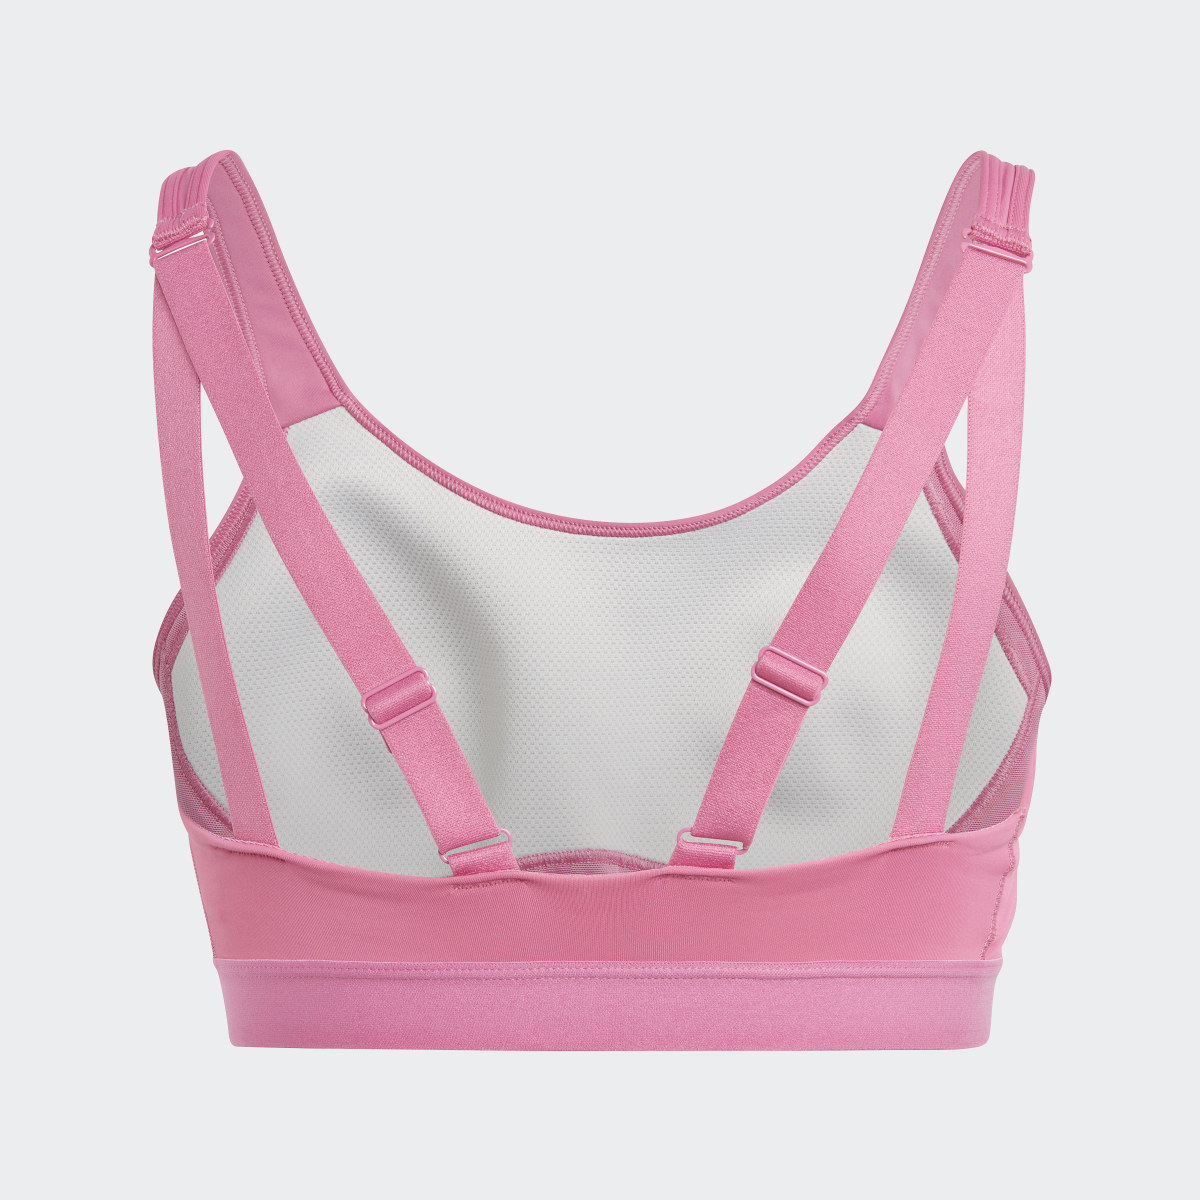 Adidas TLRD Move Training High-Support Bra. 6